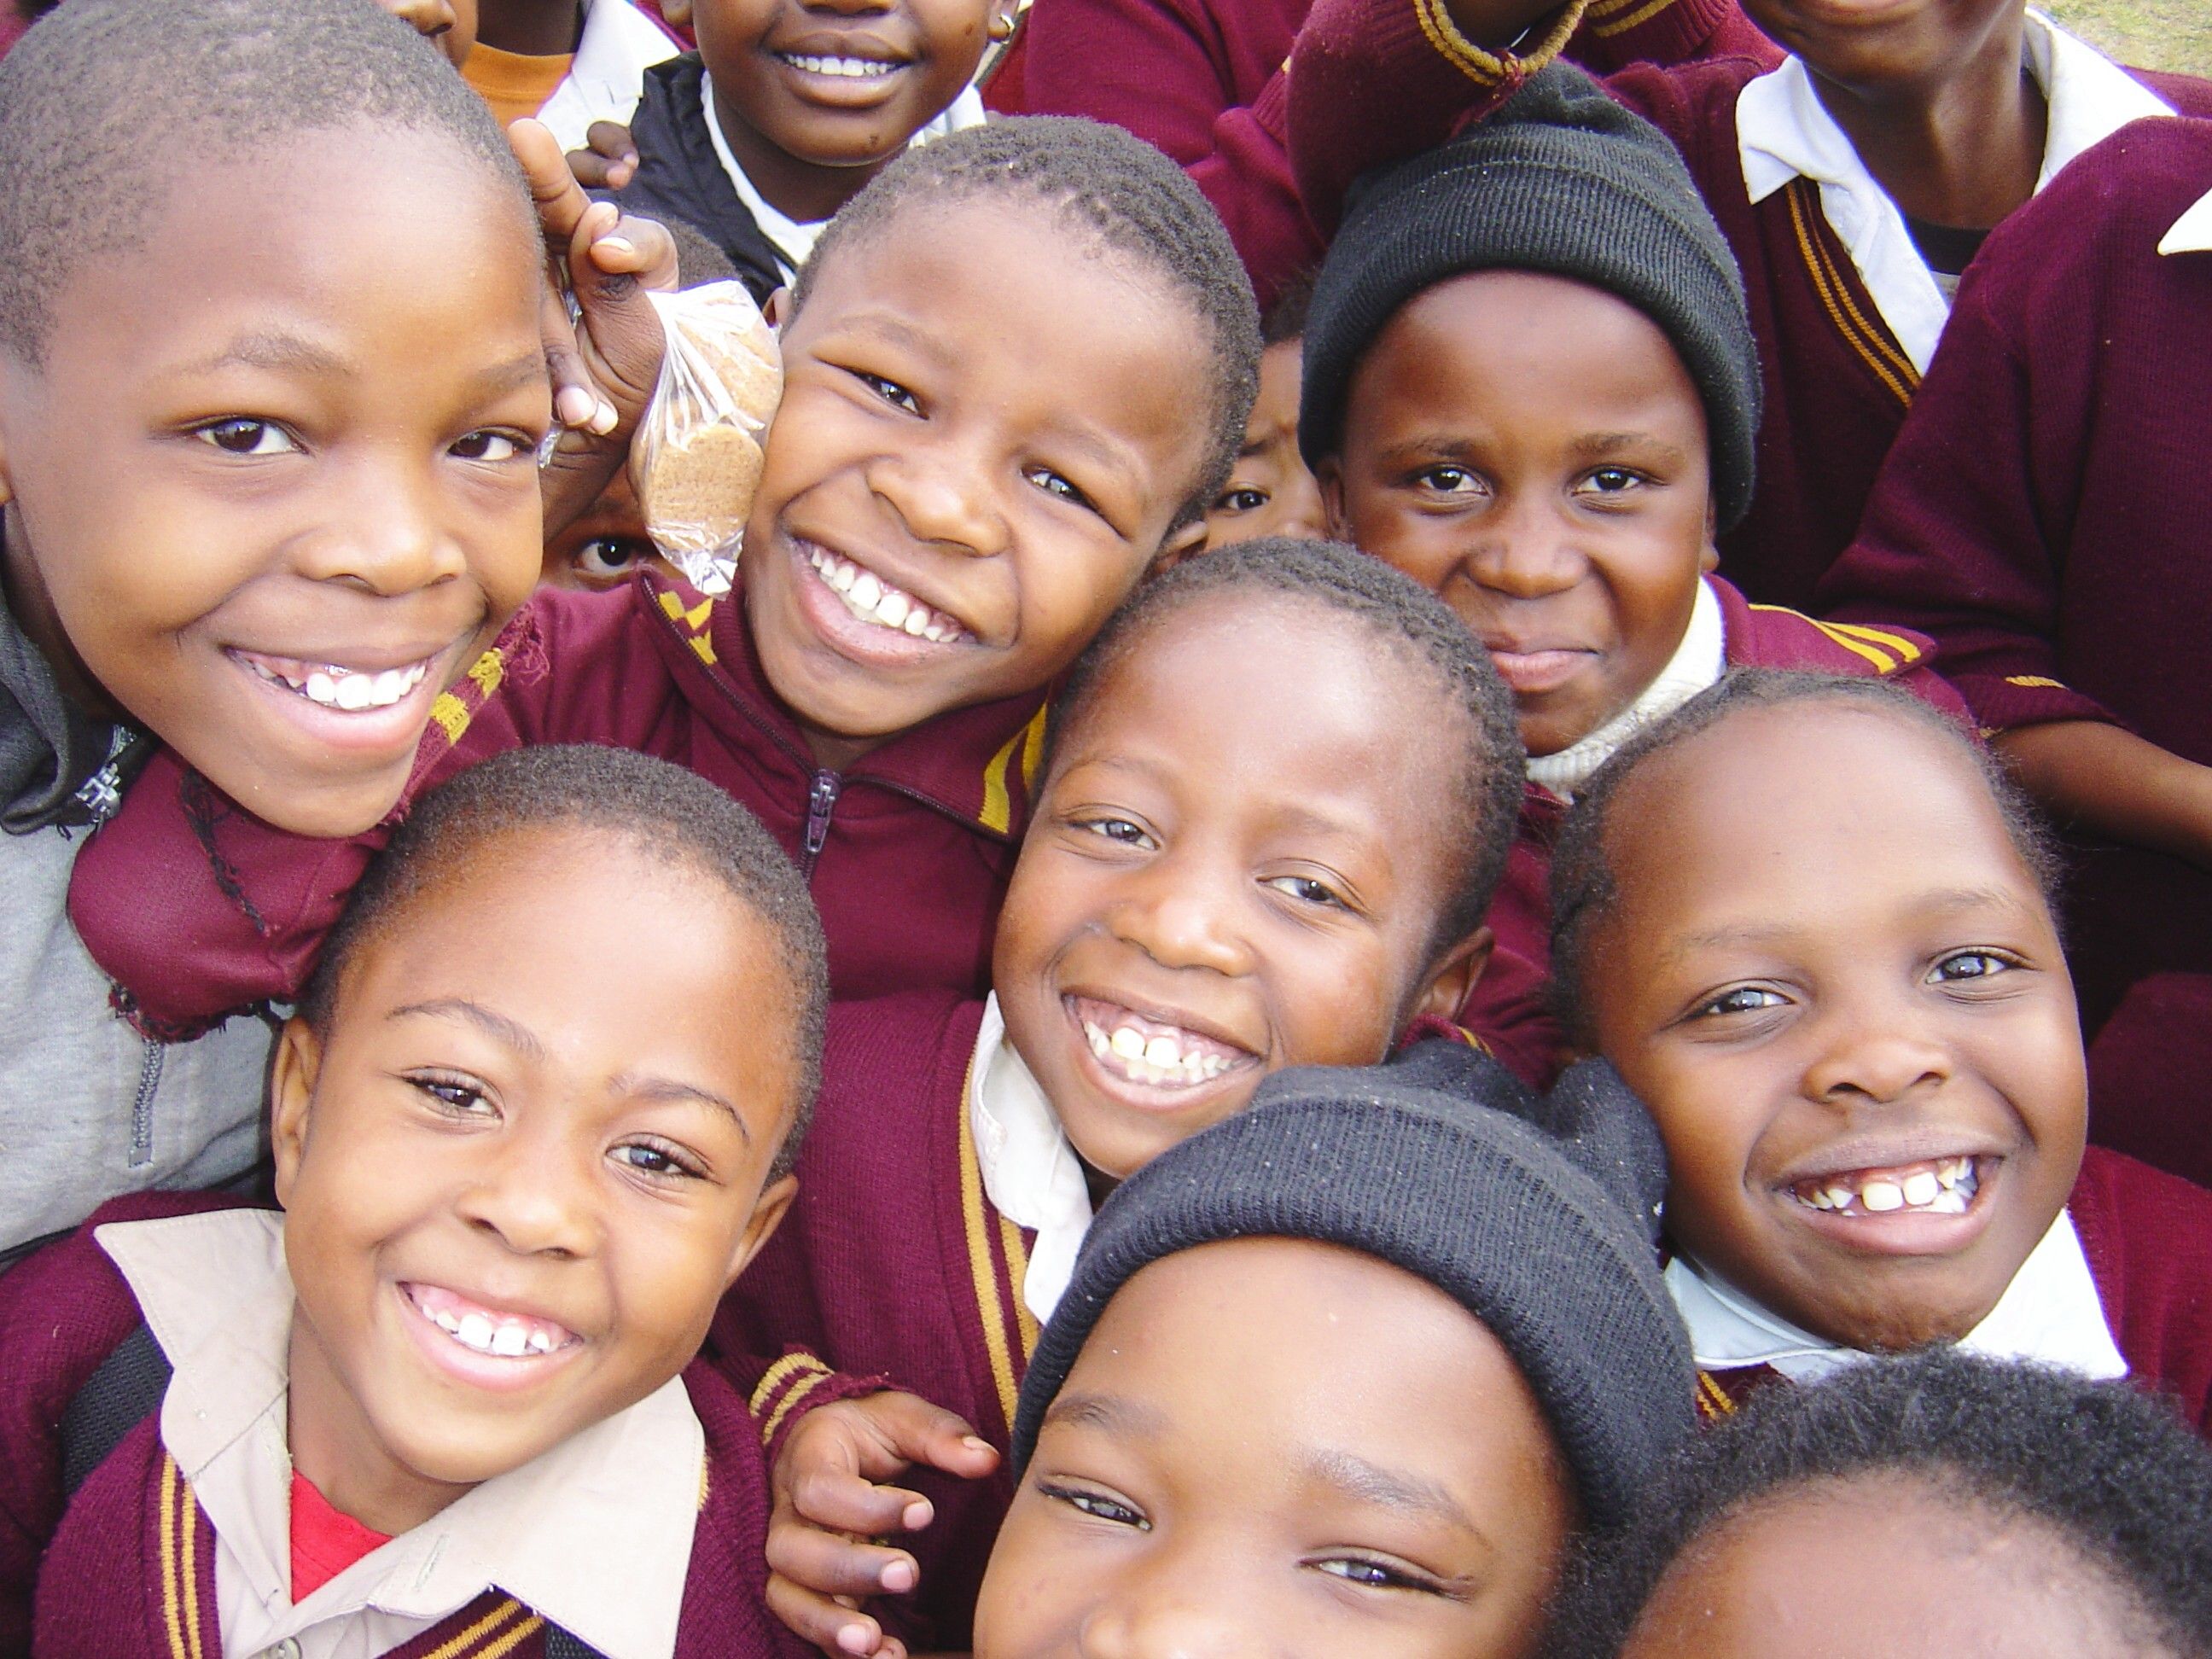 Our South Africa | School children, Africa and South africa